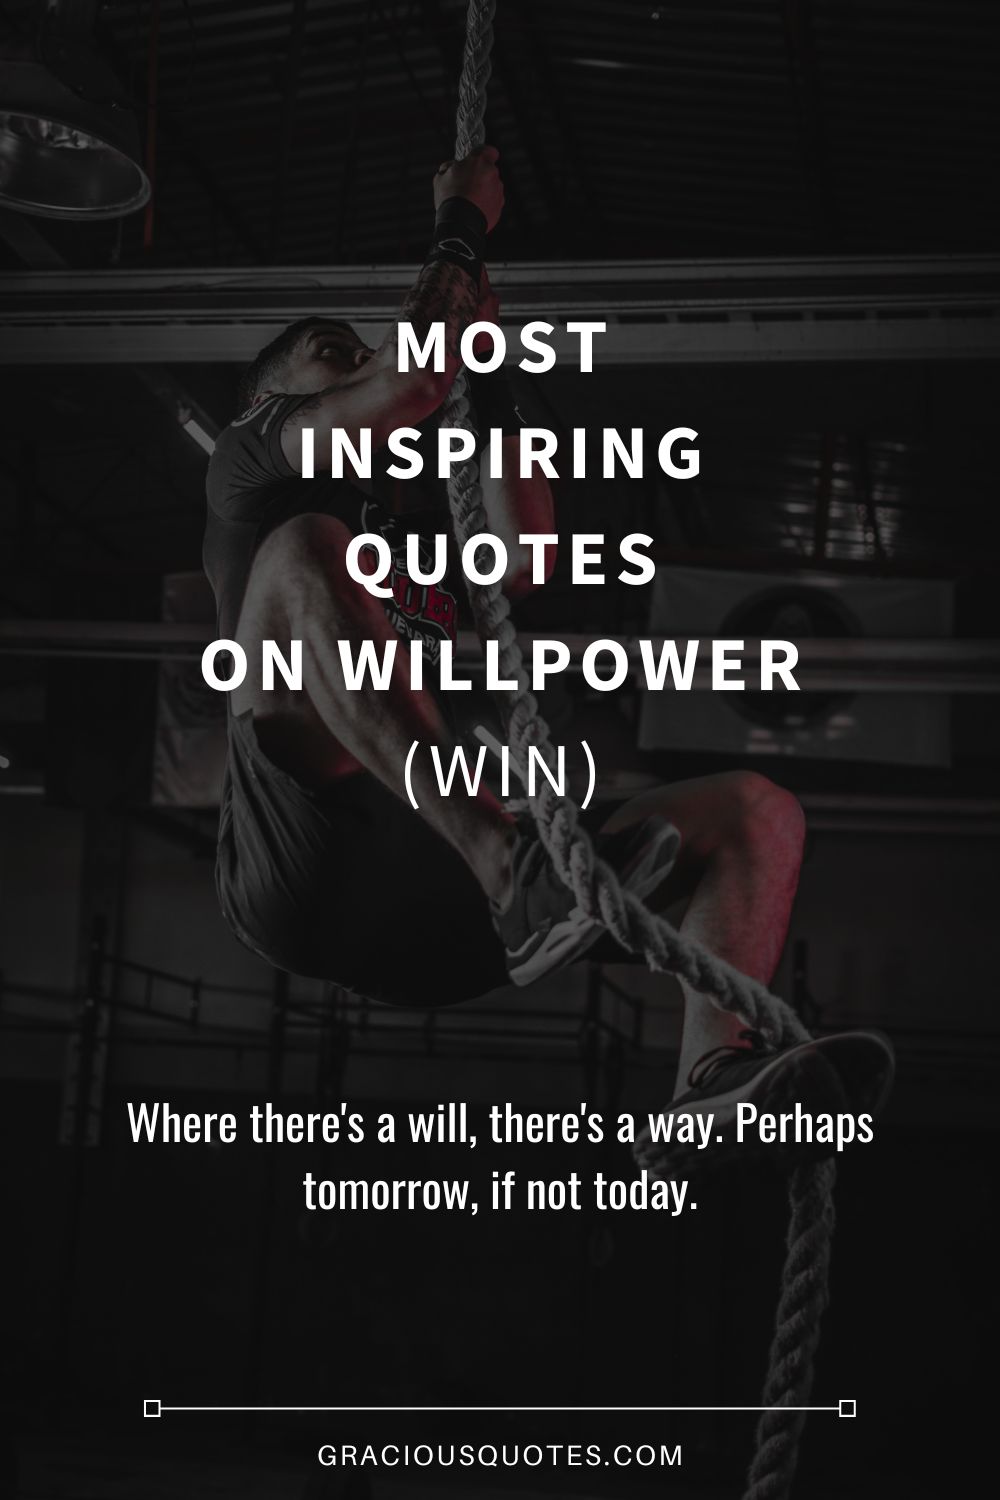 Most Inspiring Quotes on Willpower (WIN) - Gracious Quotes